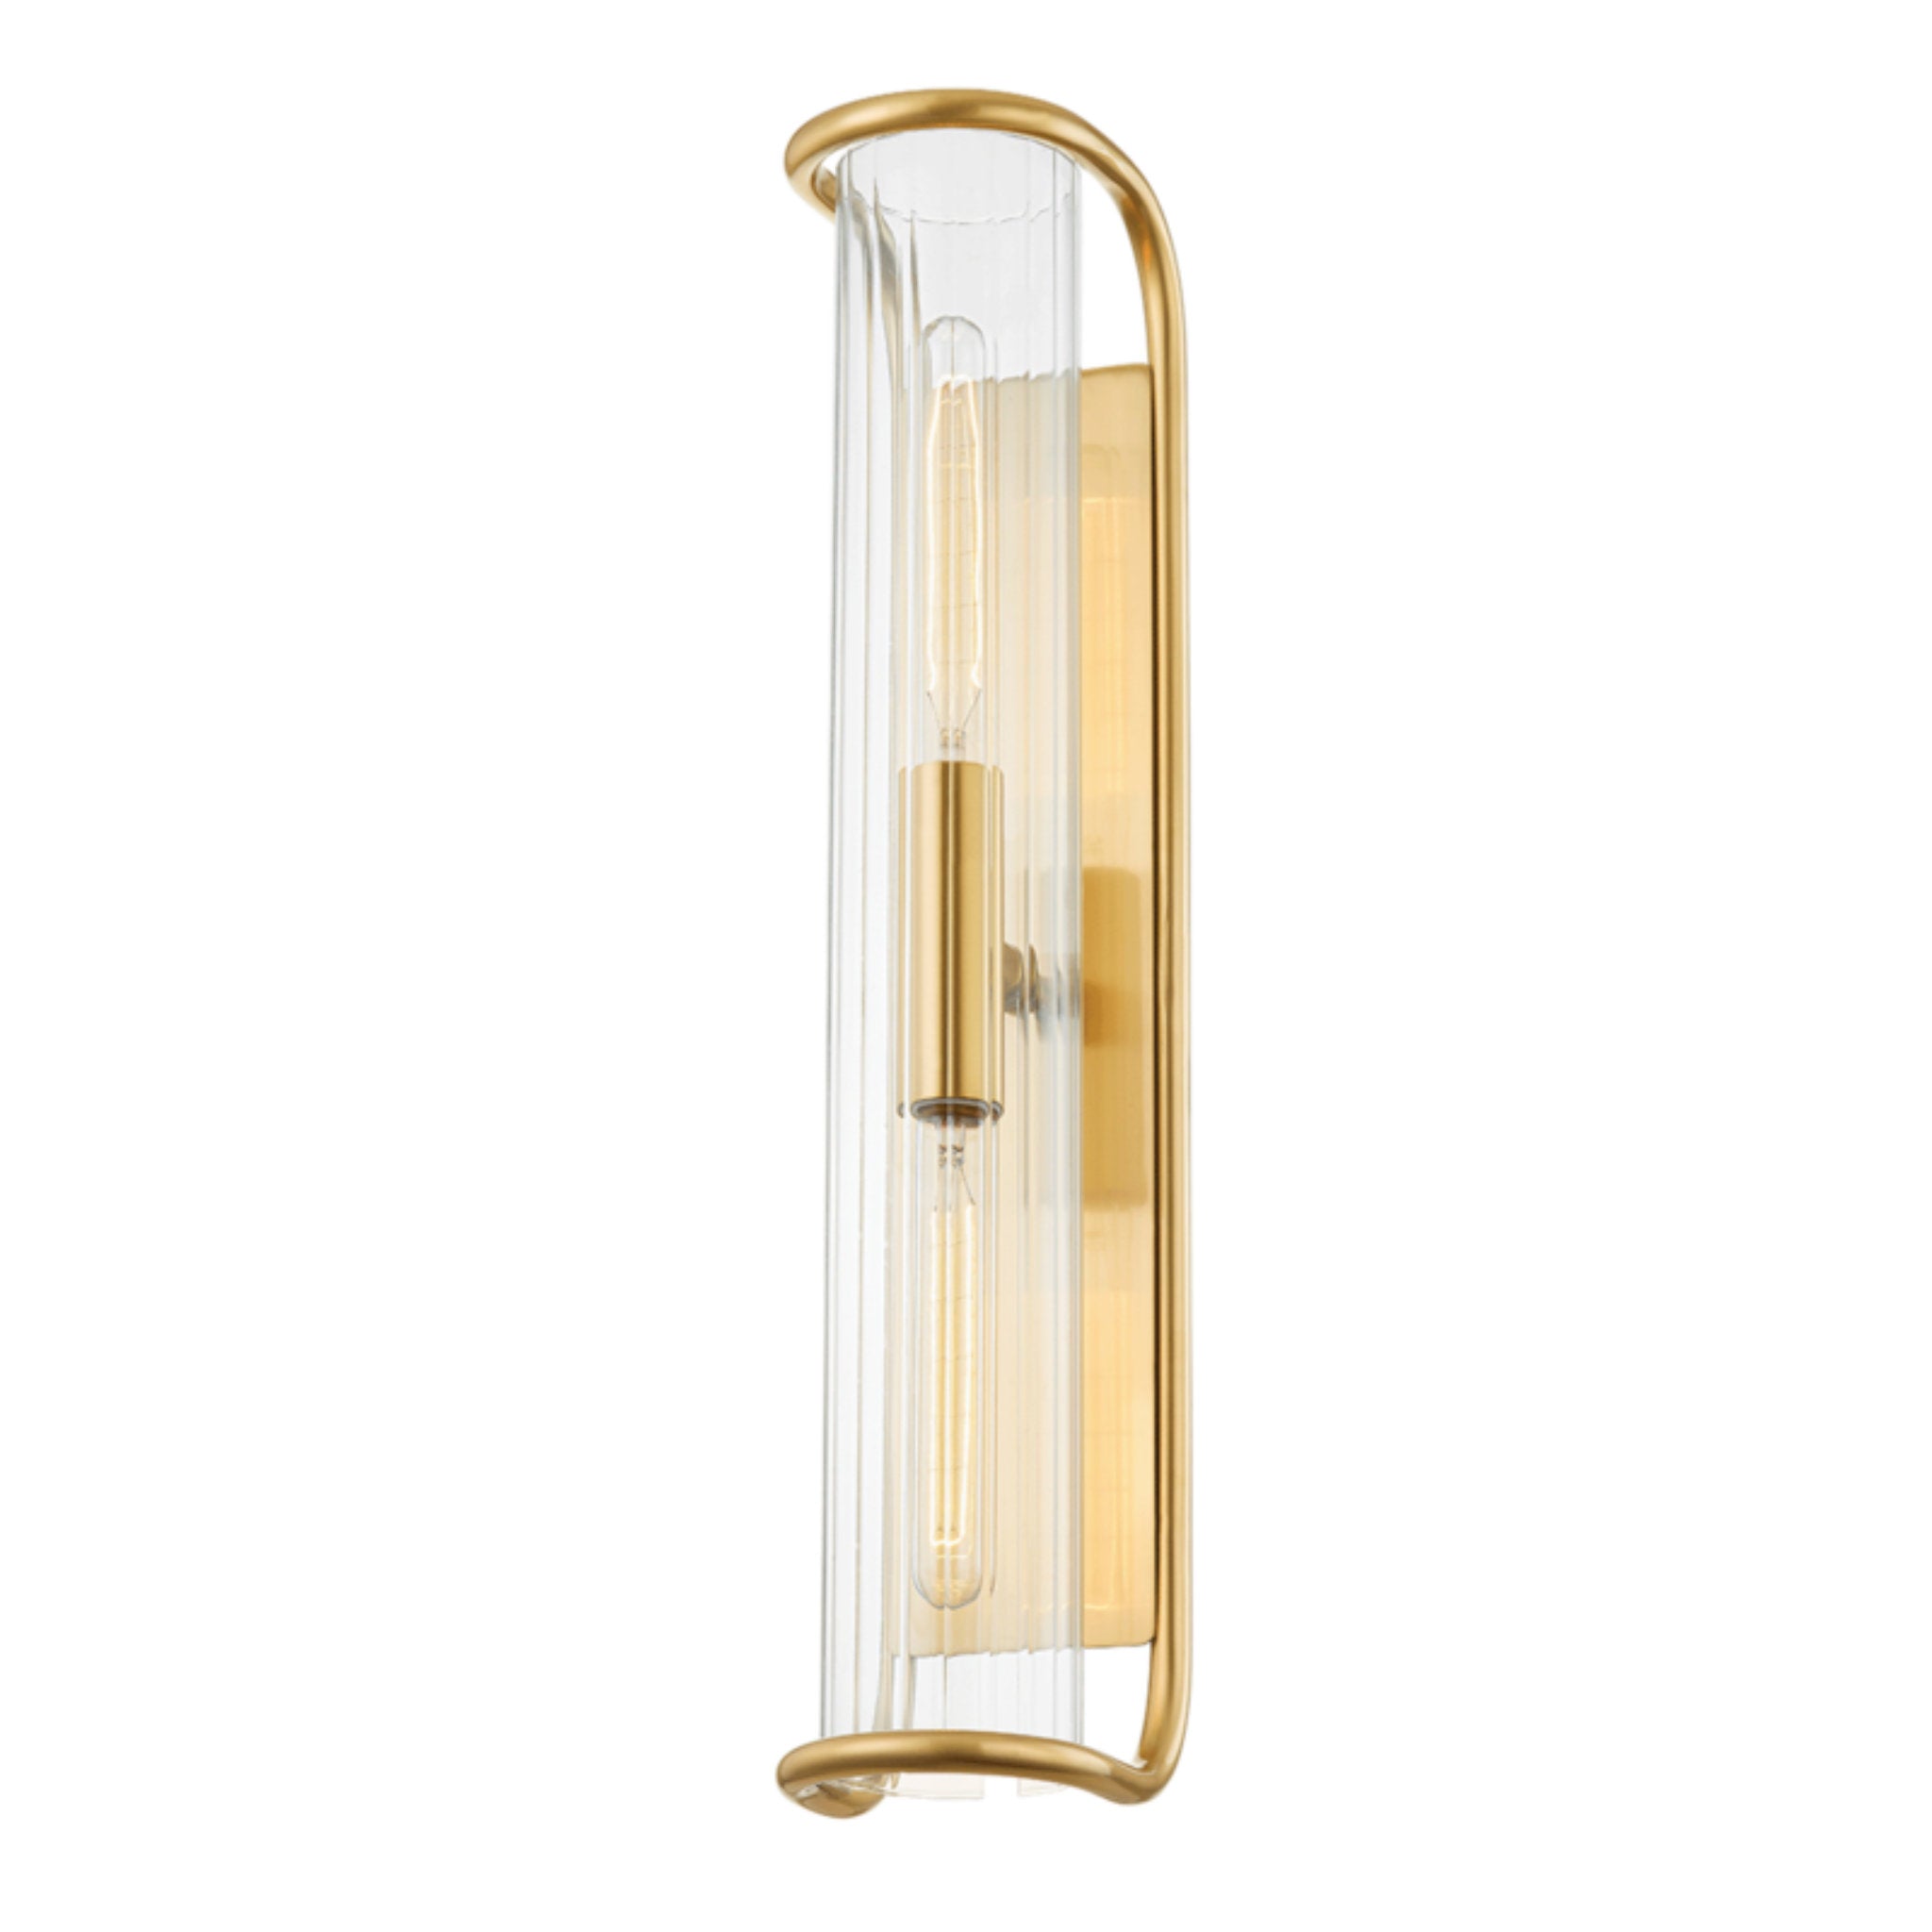 Fillmore 2 Light Wall Sconce in Aged Brass